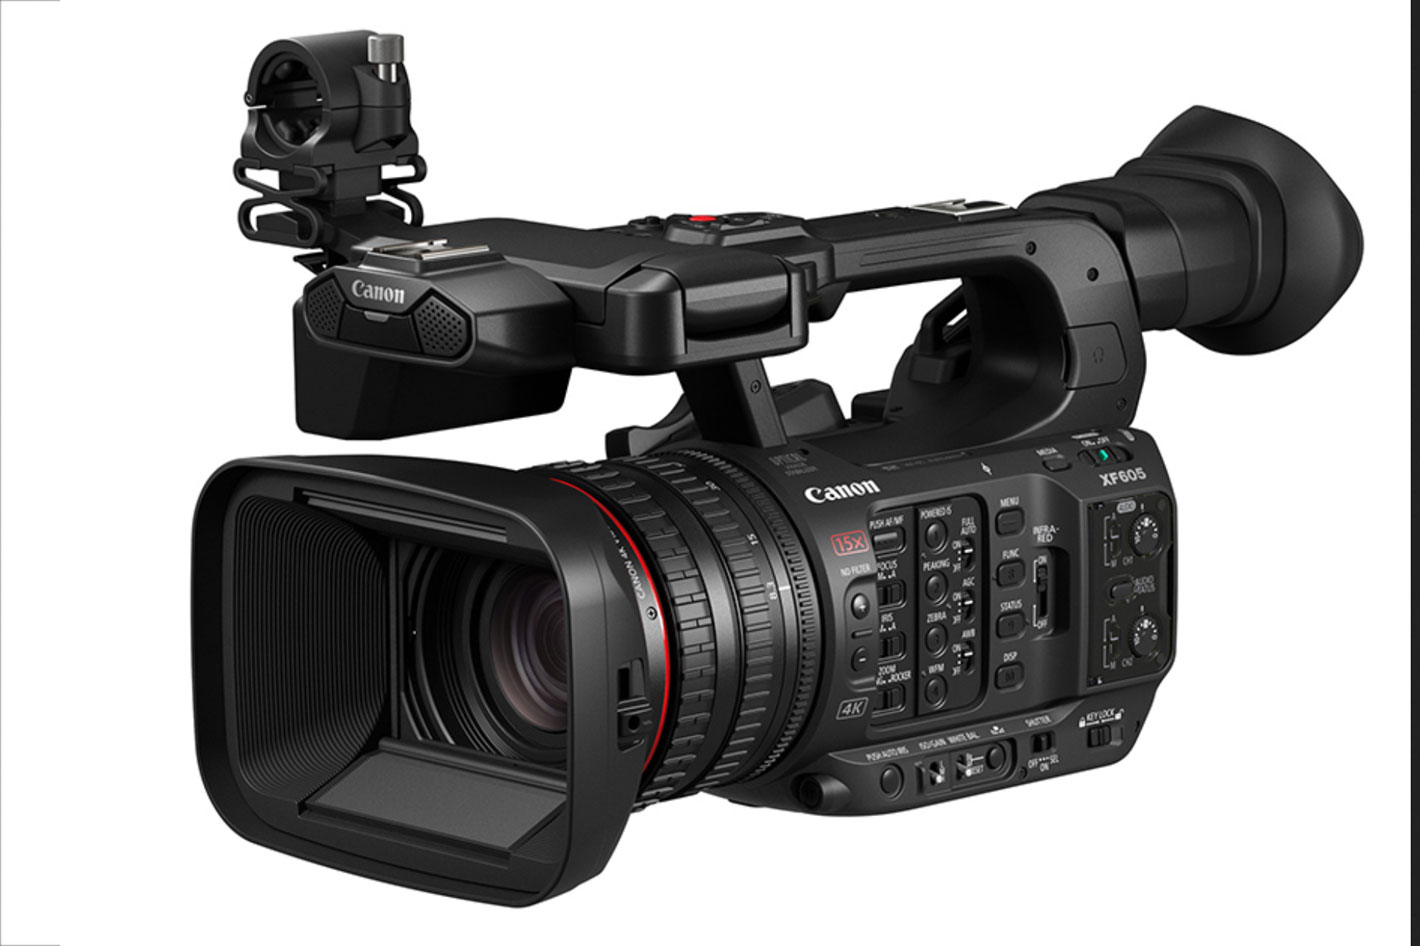 Canon’s new XF605 4K camcorder and other imaging solutions